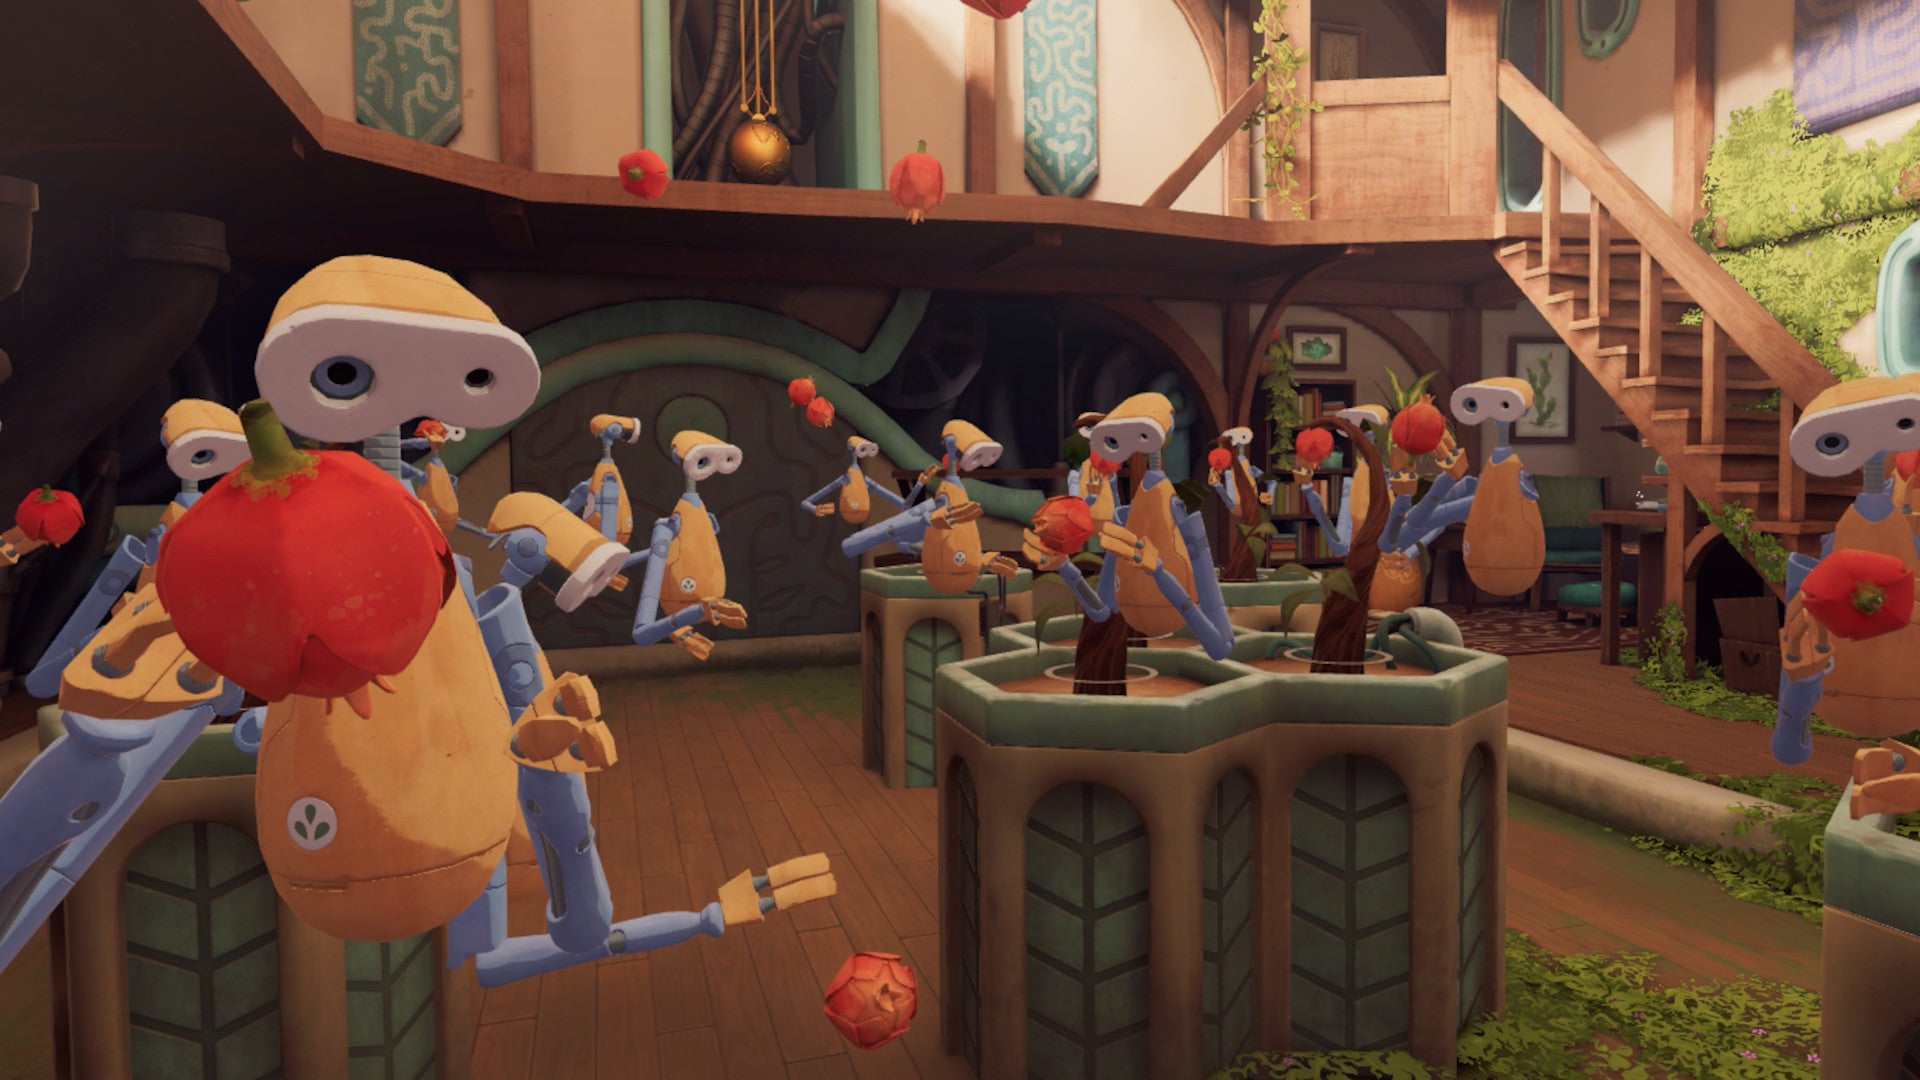 A screenshot from the VR game Clockwinder, showing many identical little humanoid robots all doing different things in a small garden